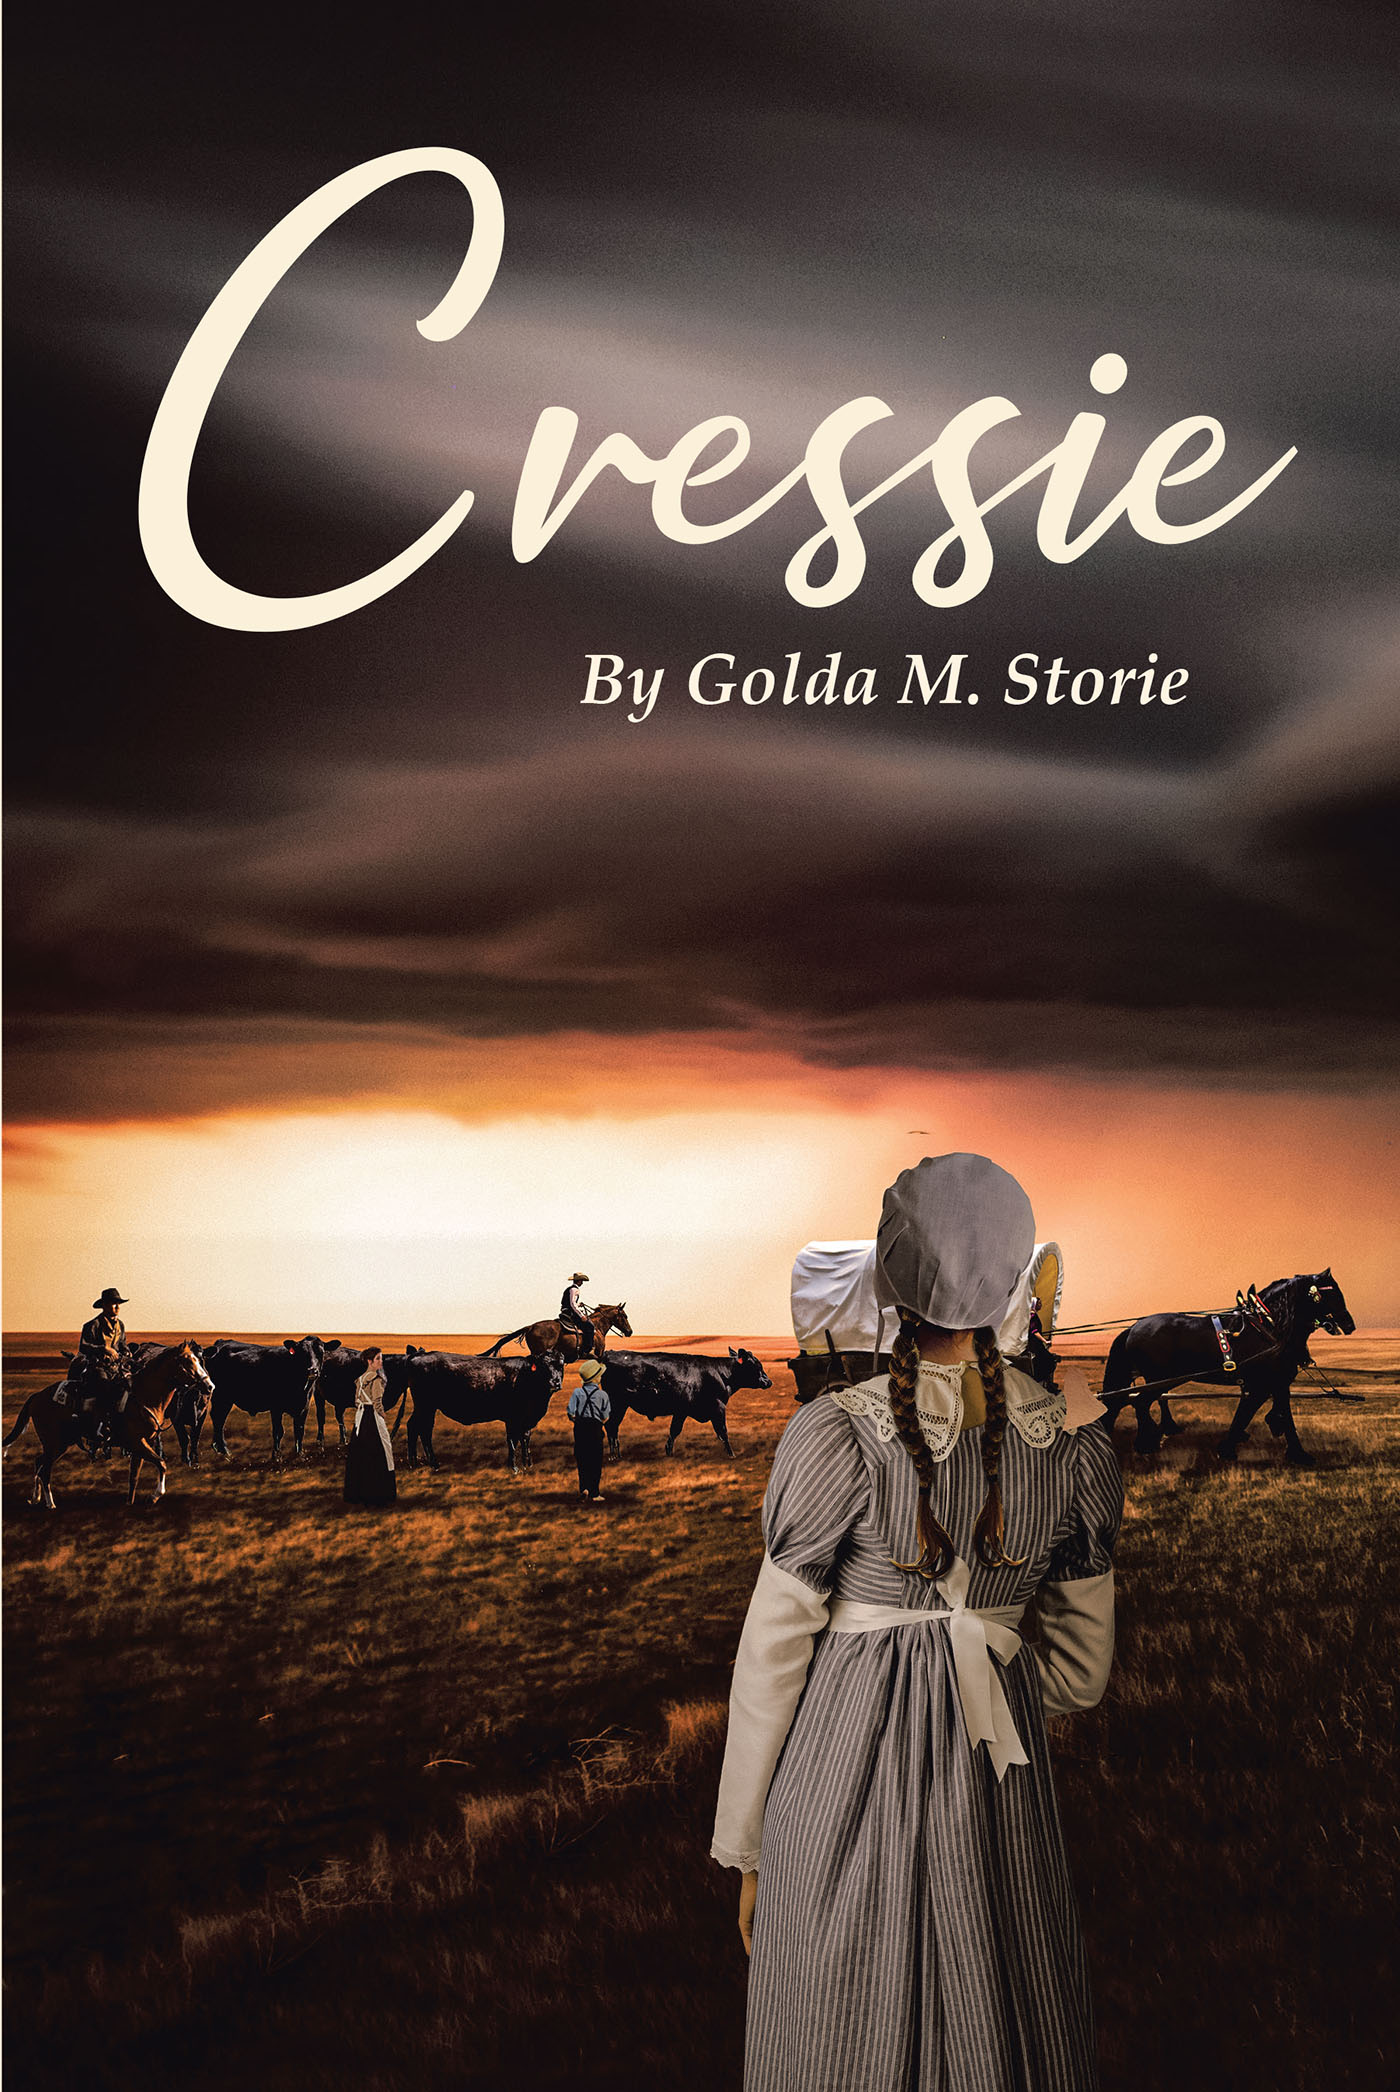 Author Golda M. Storie’s New Book, "Cressie," is a Riveting Coming-of-Age Story Centered Around a Young Girl Living in America During the Mid-1800s